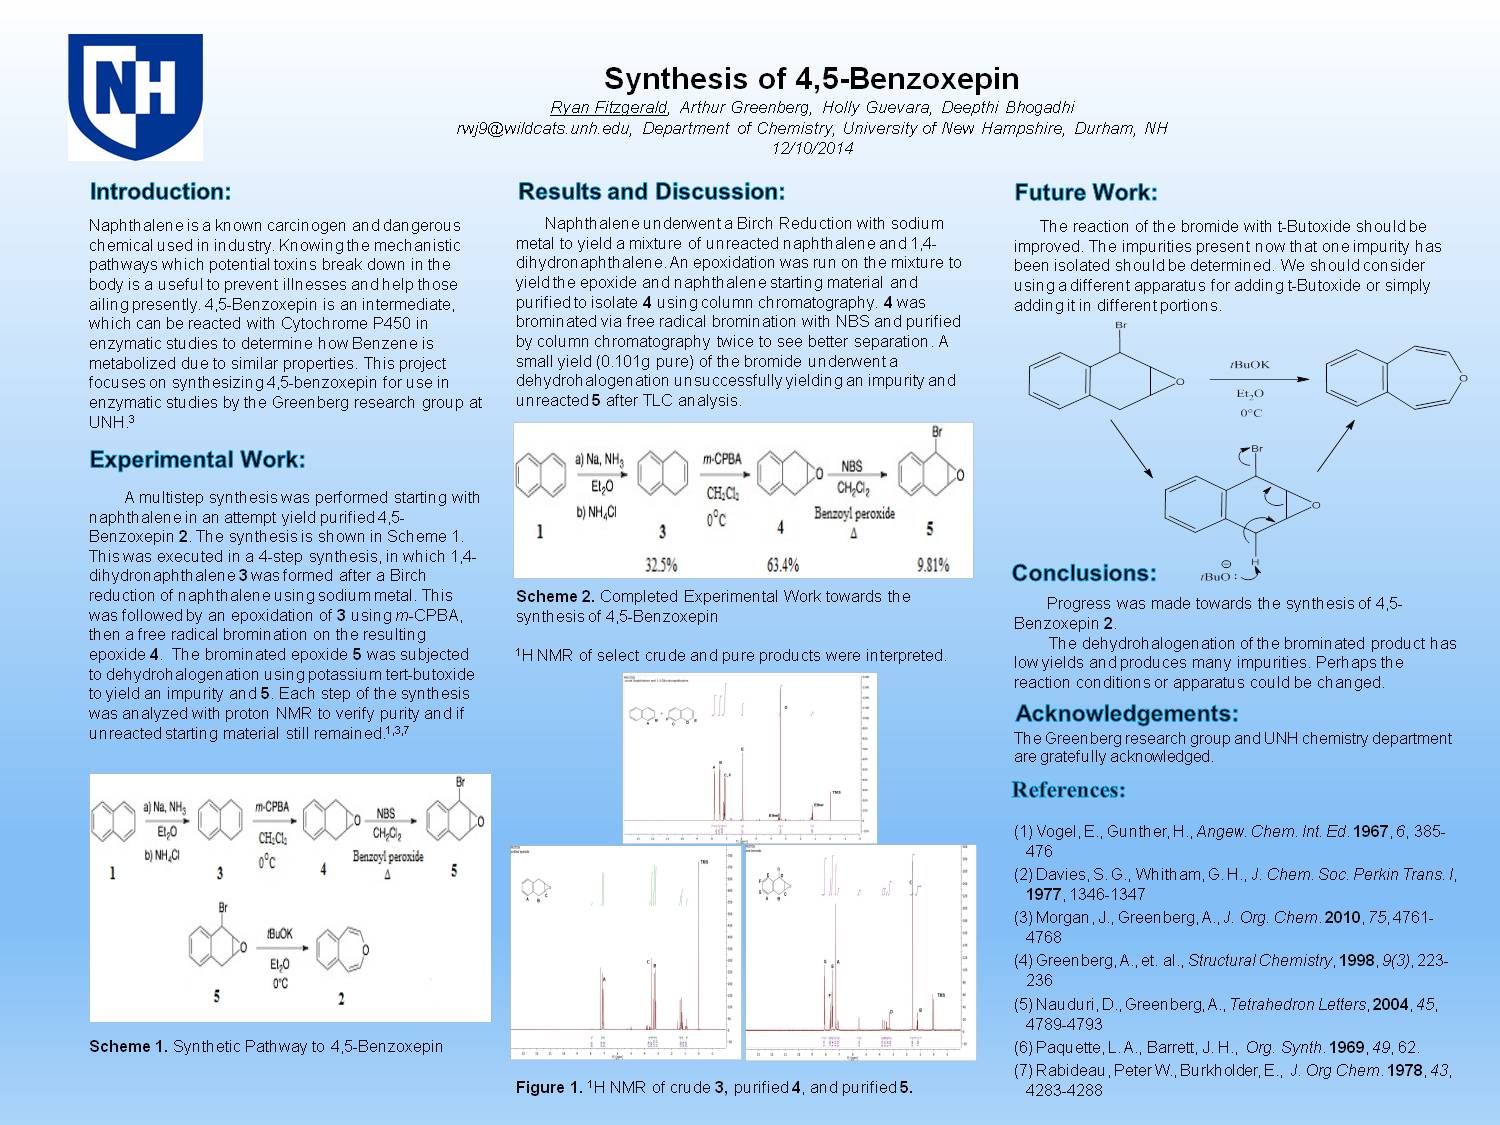 Synthesis Of 4,5-Benzoxepin by rwj9